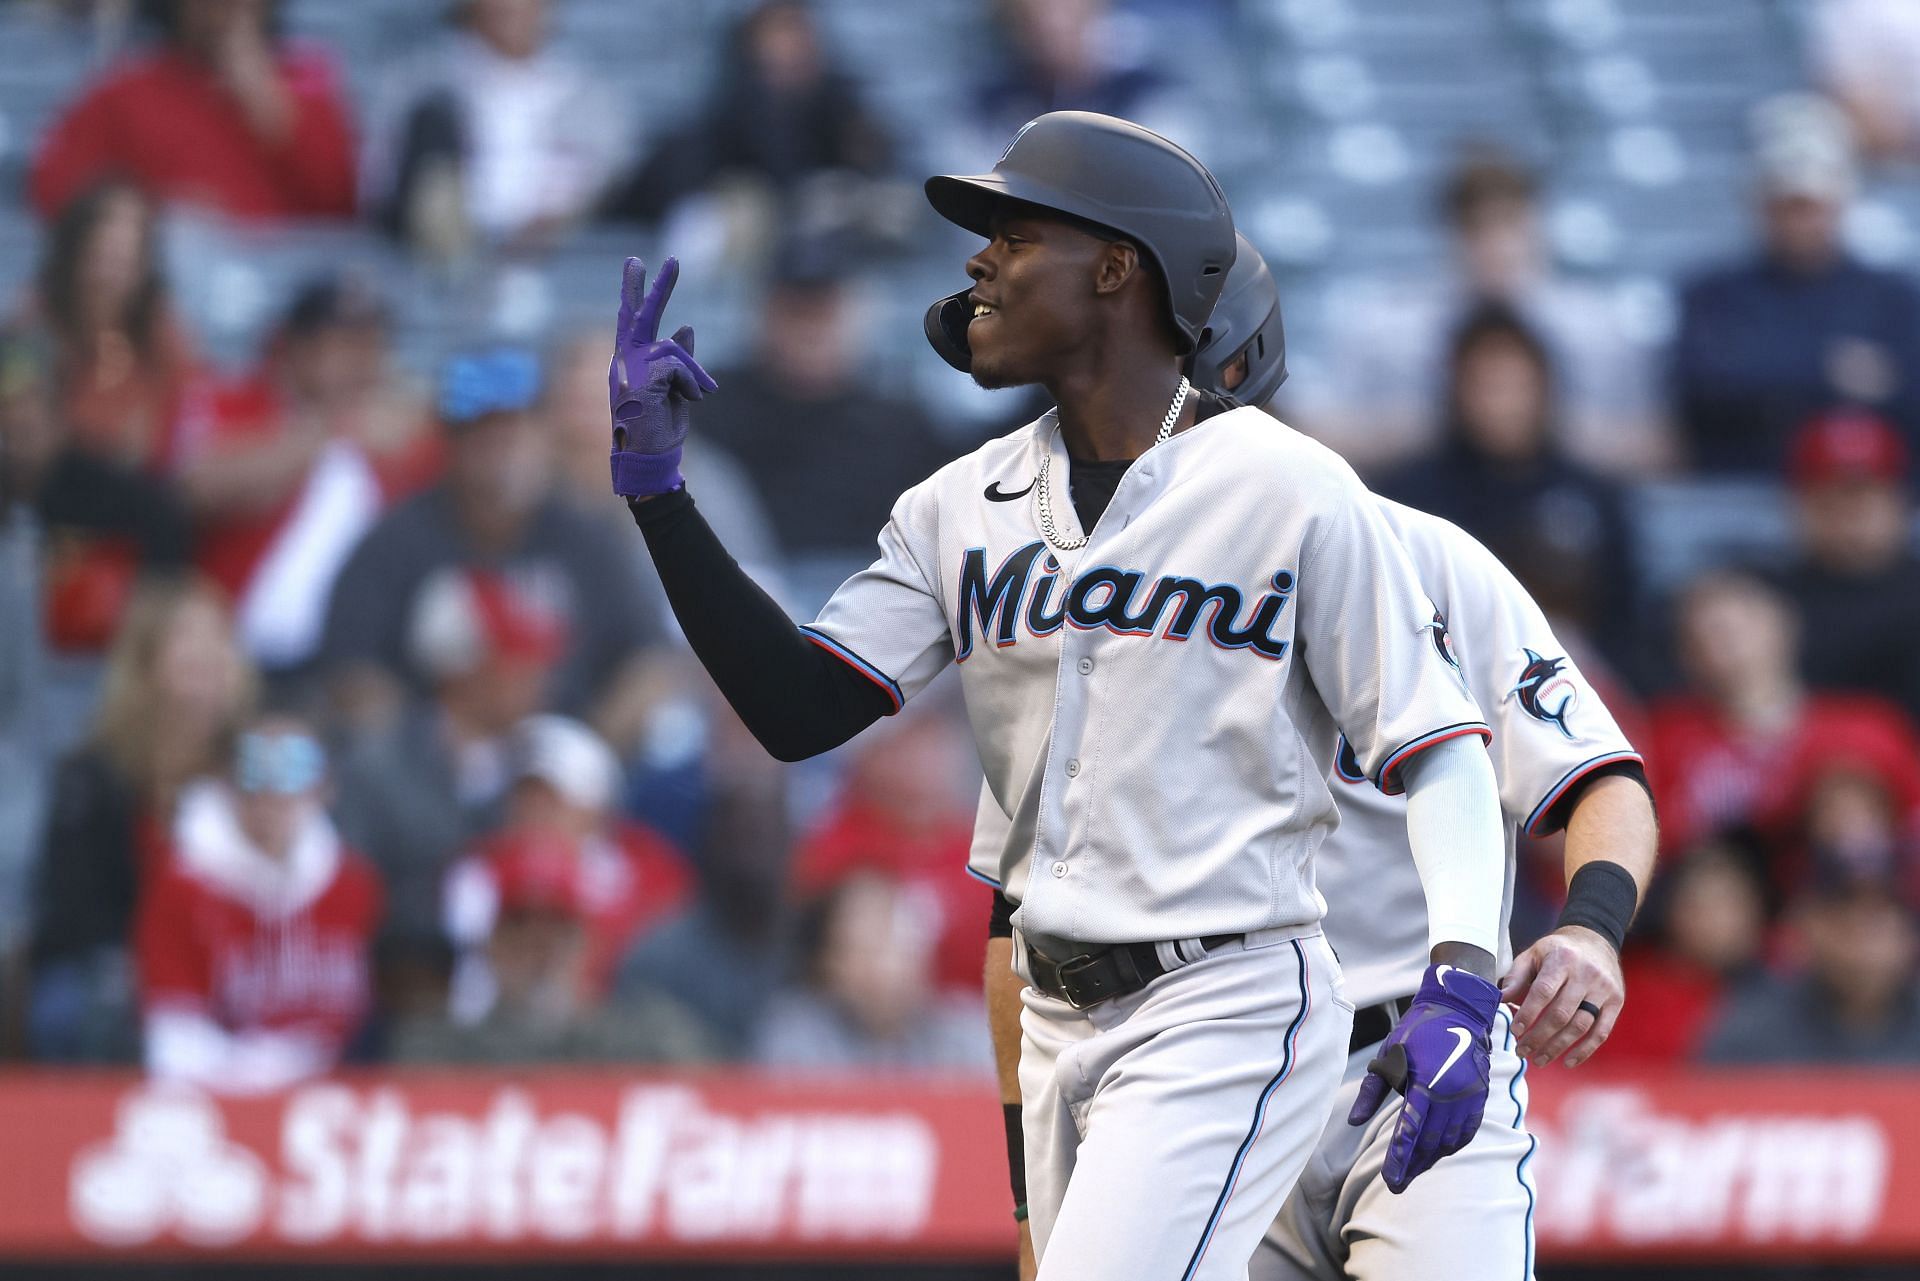 Can Jazz Chisholm stop being so f***ing cool?” - San Francisco Giants fans  can't help but compliment Miami Marlins infielder Jazz Chisholm Jr. after  his miraculous save